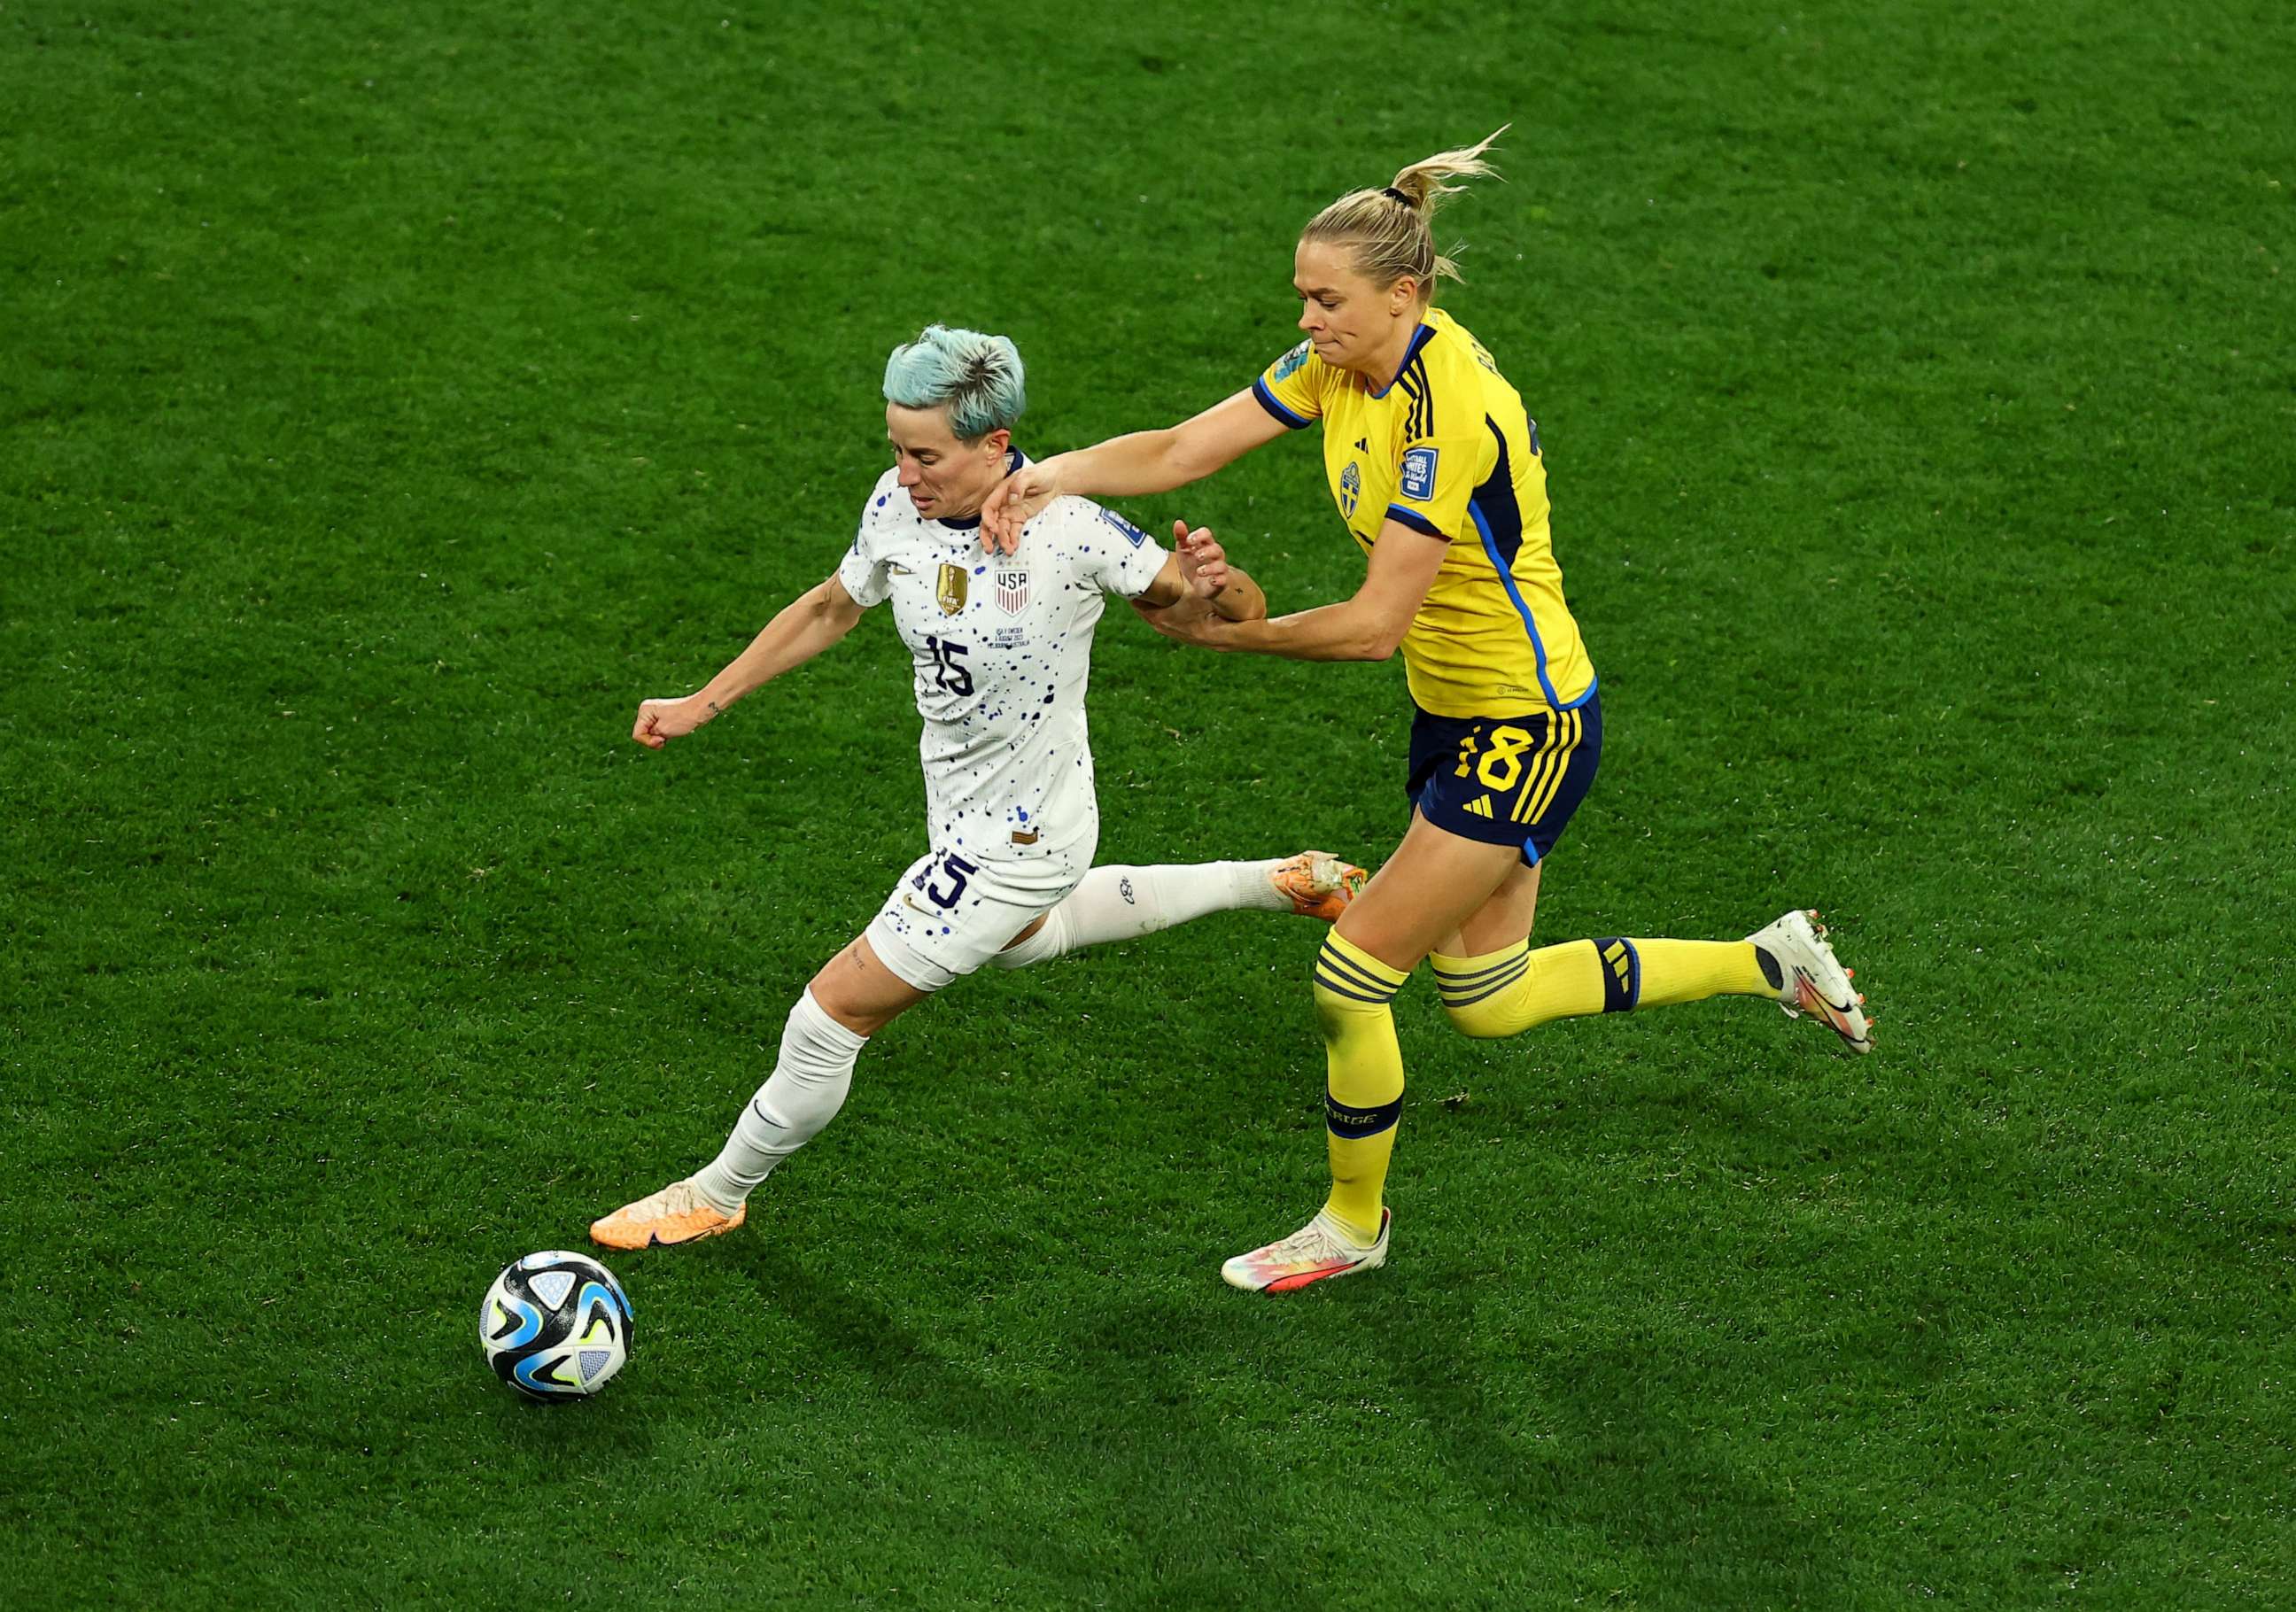 PHOTO: Megan Rapinoe of the U.S. in action with Sweden's Fridolina Rolfo in the Women's World Cup in Melbourne, Australia, on August 6, 2023.